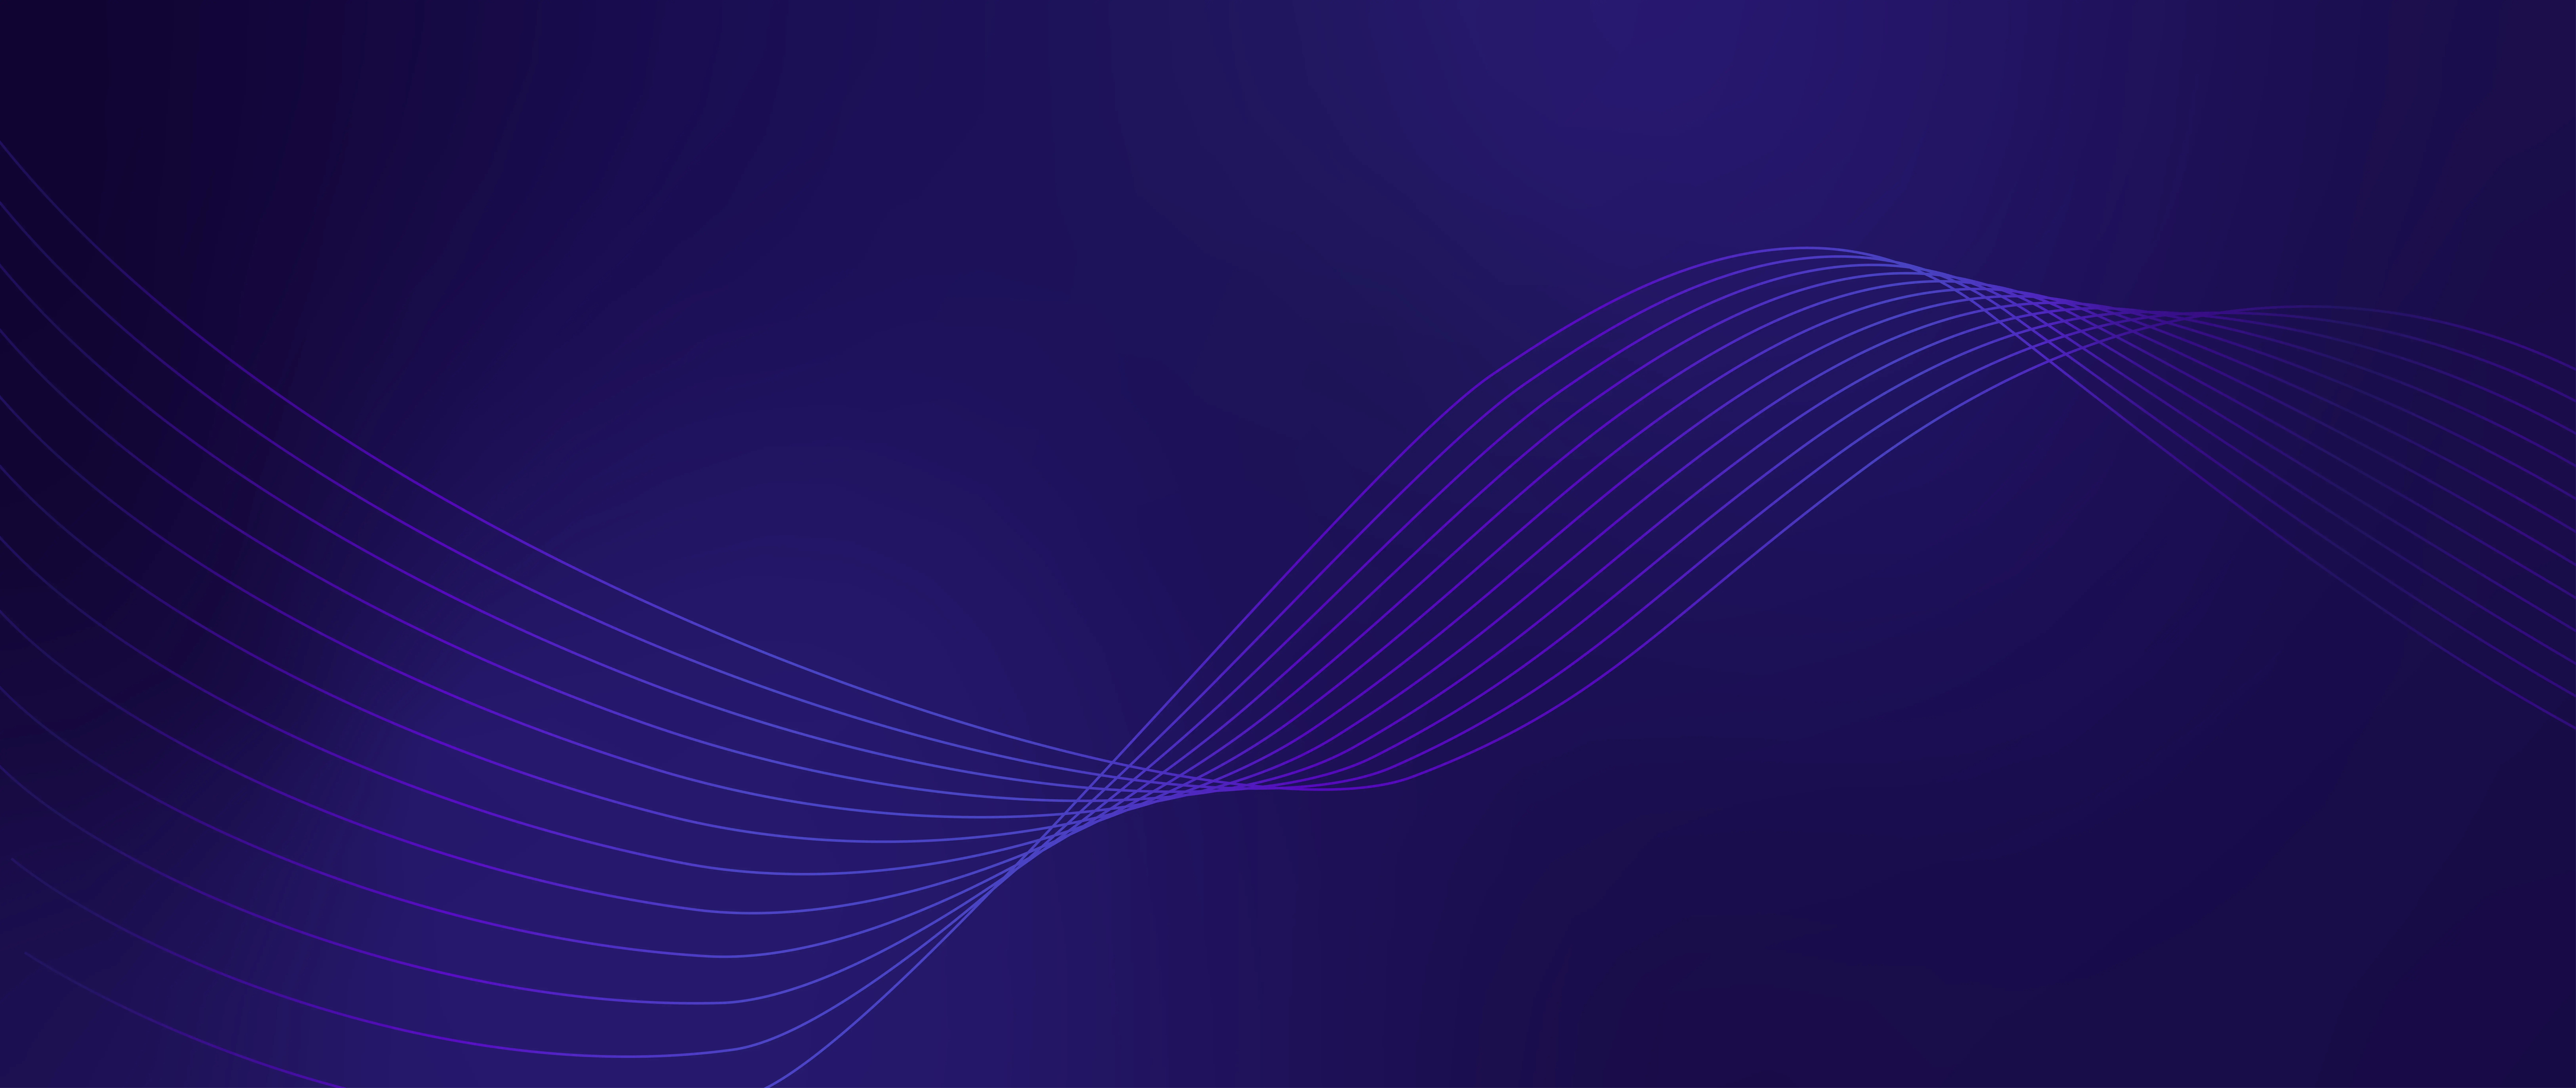 blue and purple gradient background with gradient lines